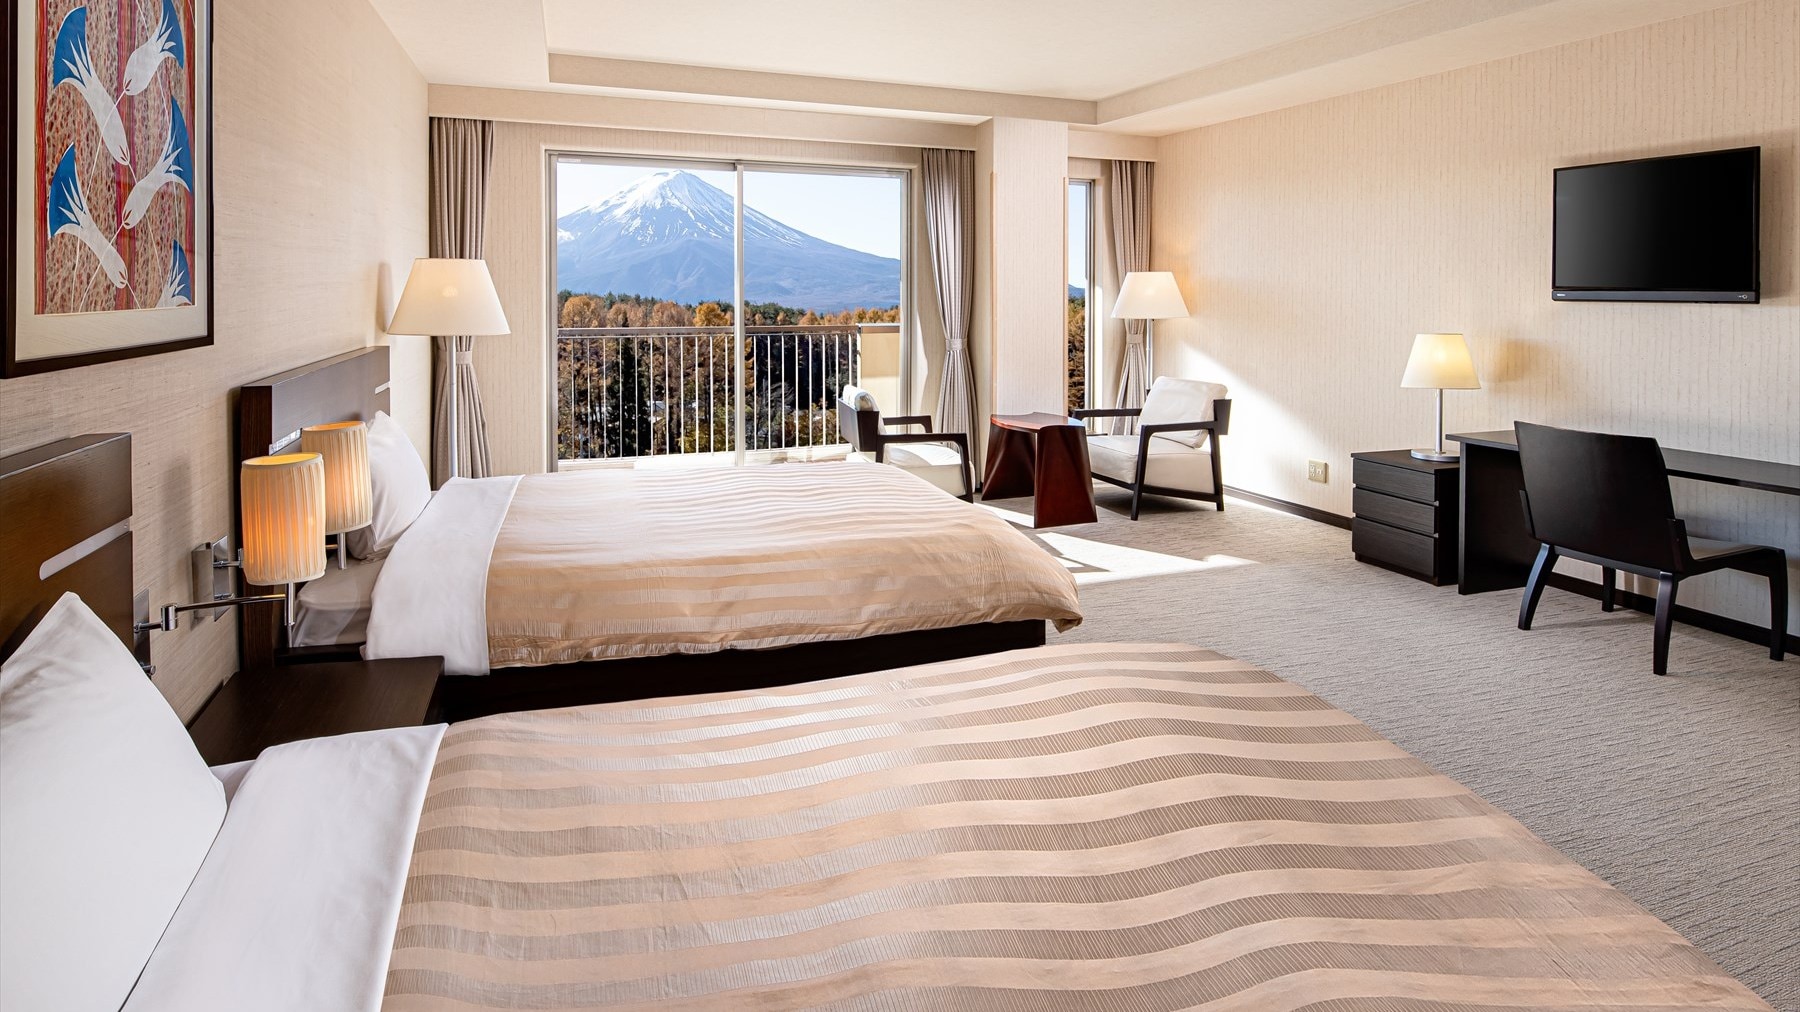 [Western-style room] Twin room | All rooms with Mt. Fuji view (image)